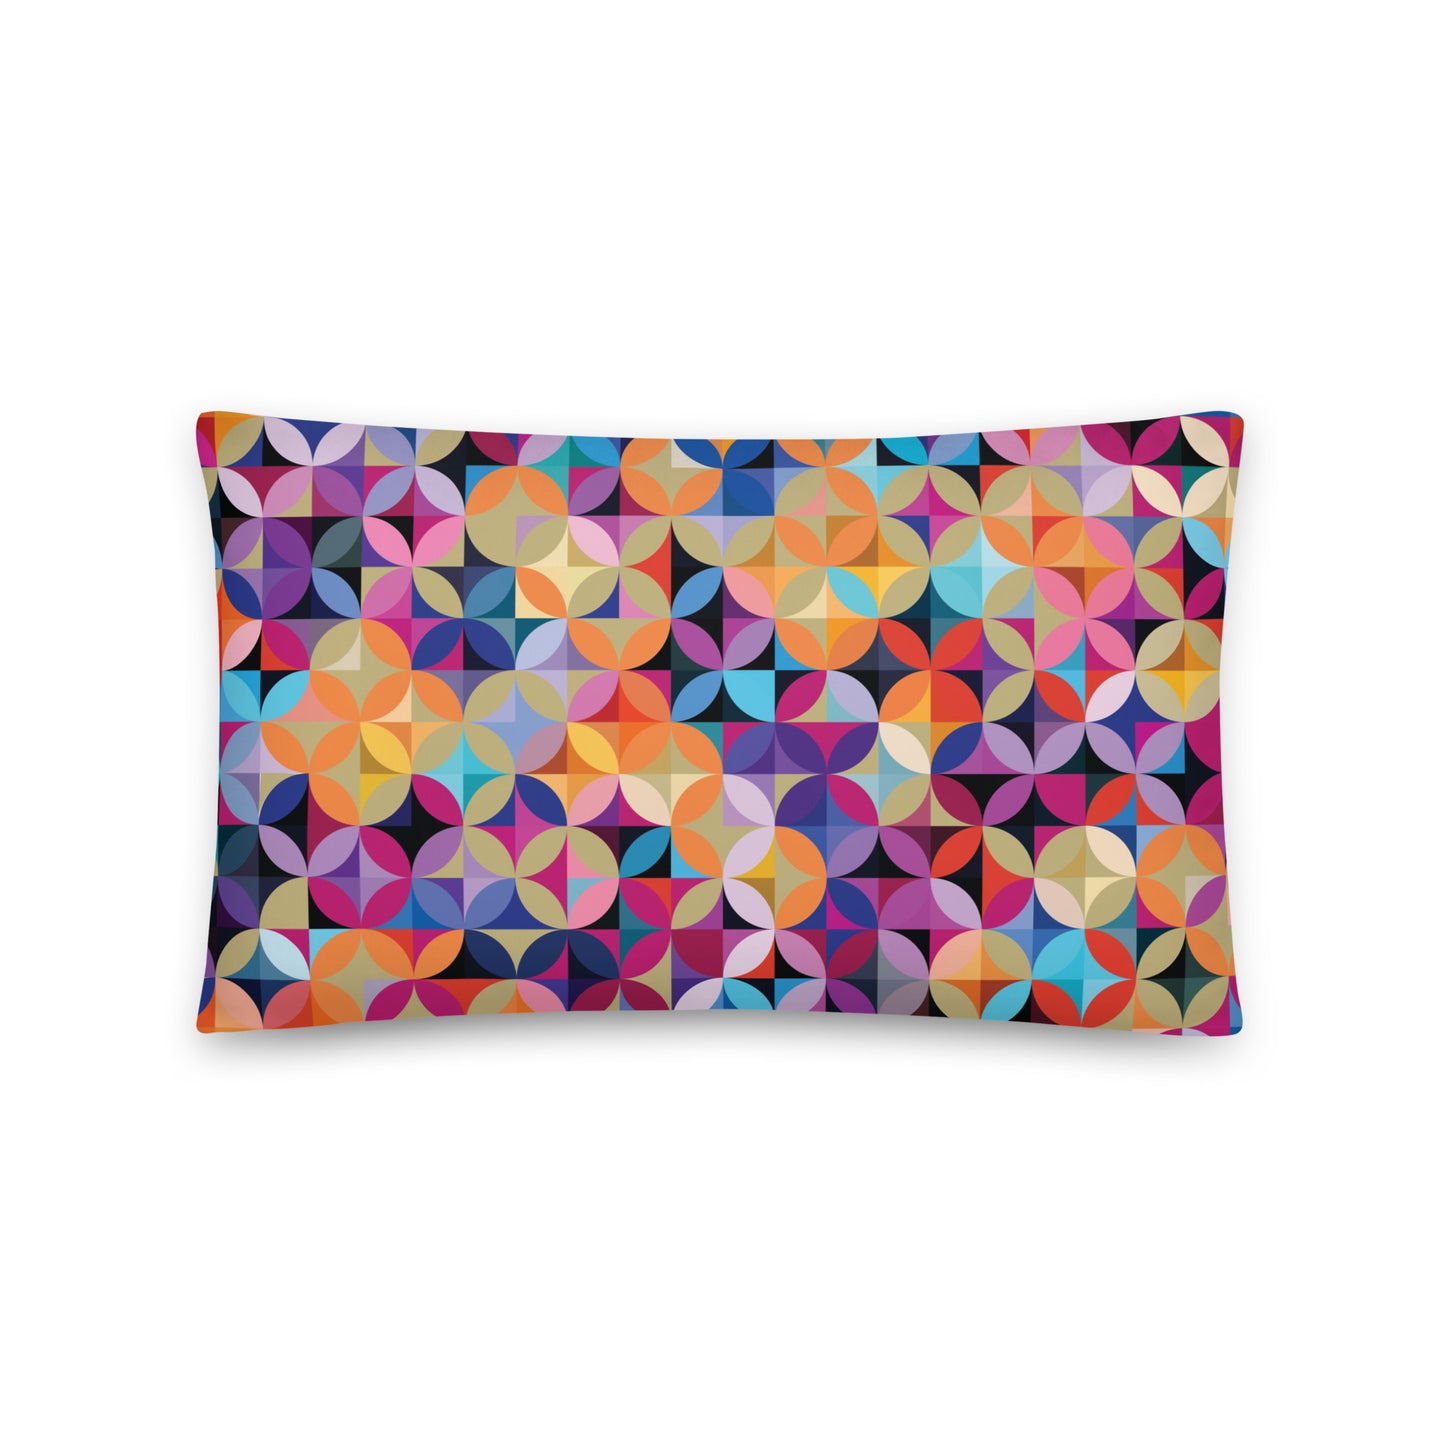 Multicolor Illusions - Sustainably Made Pillows